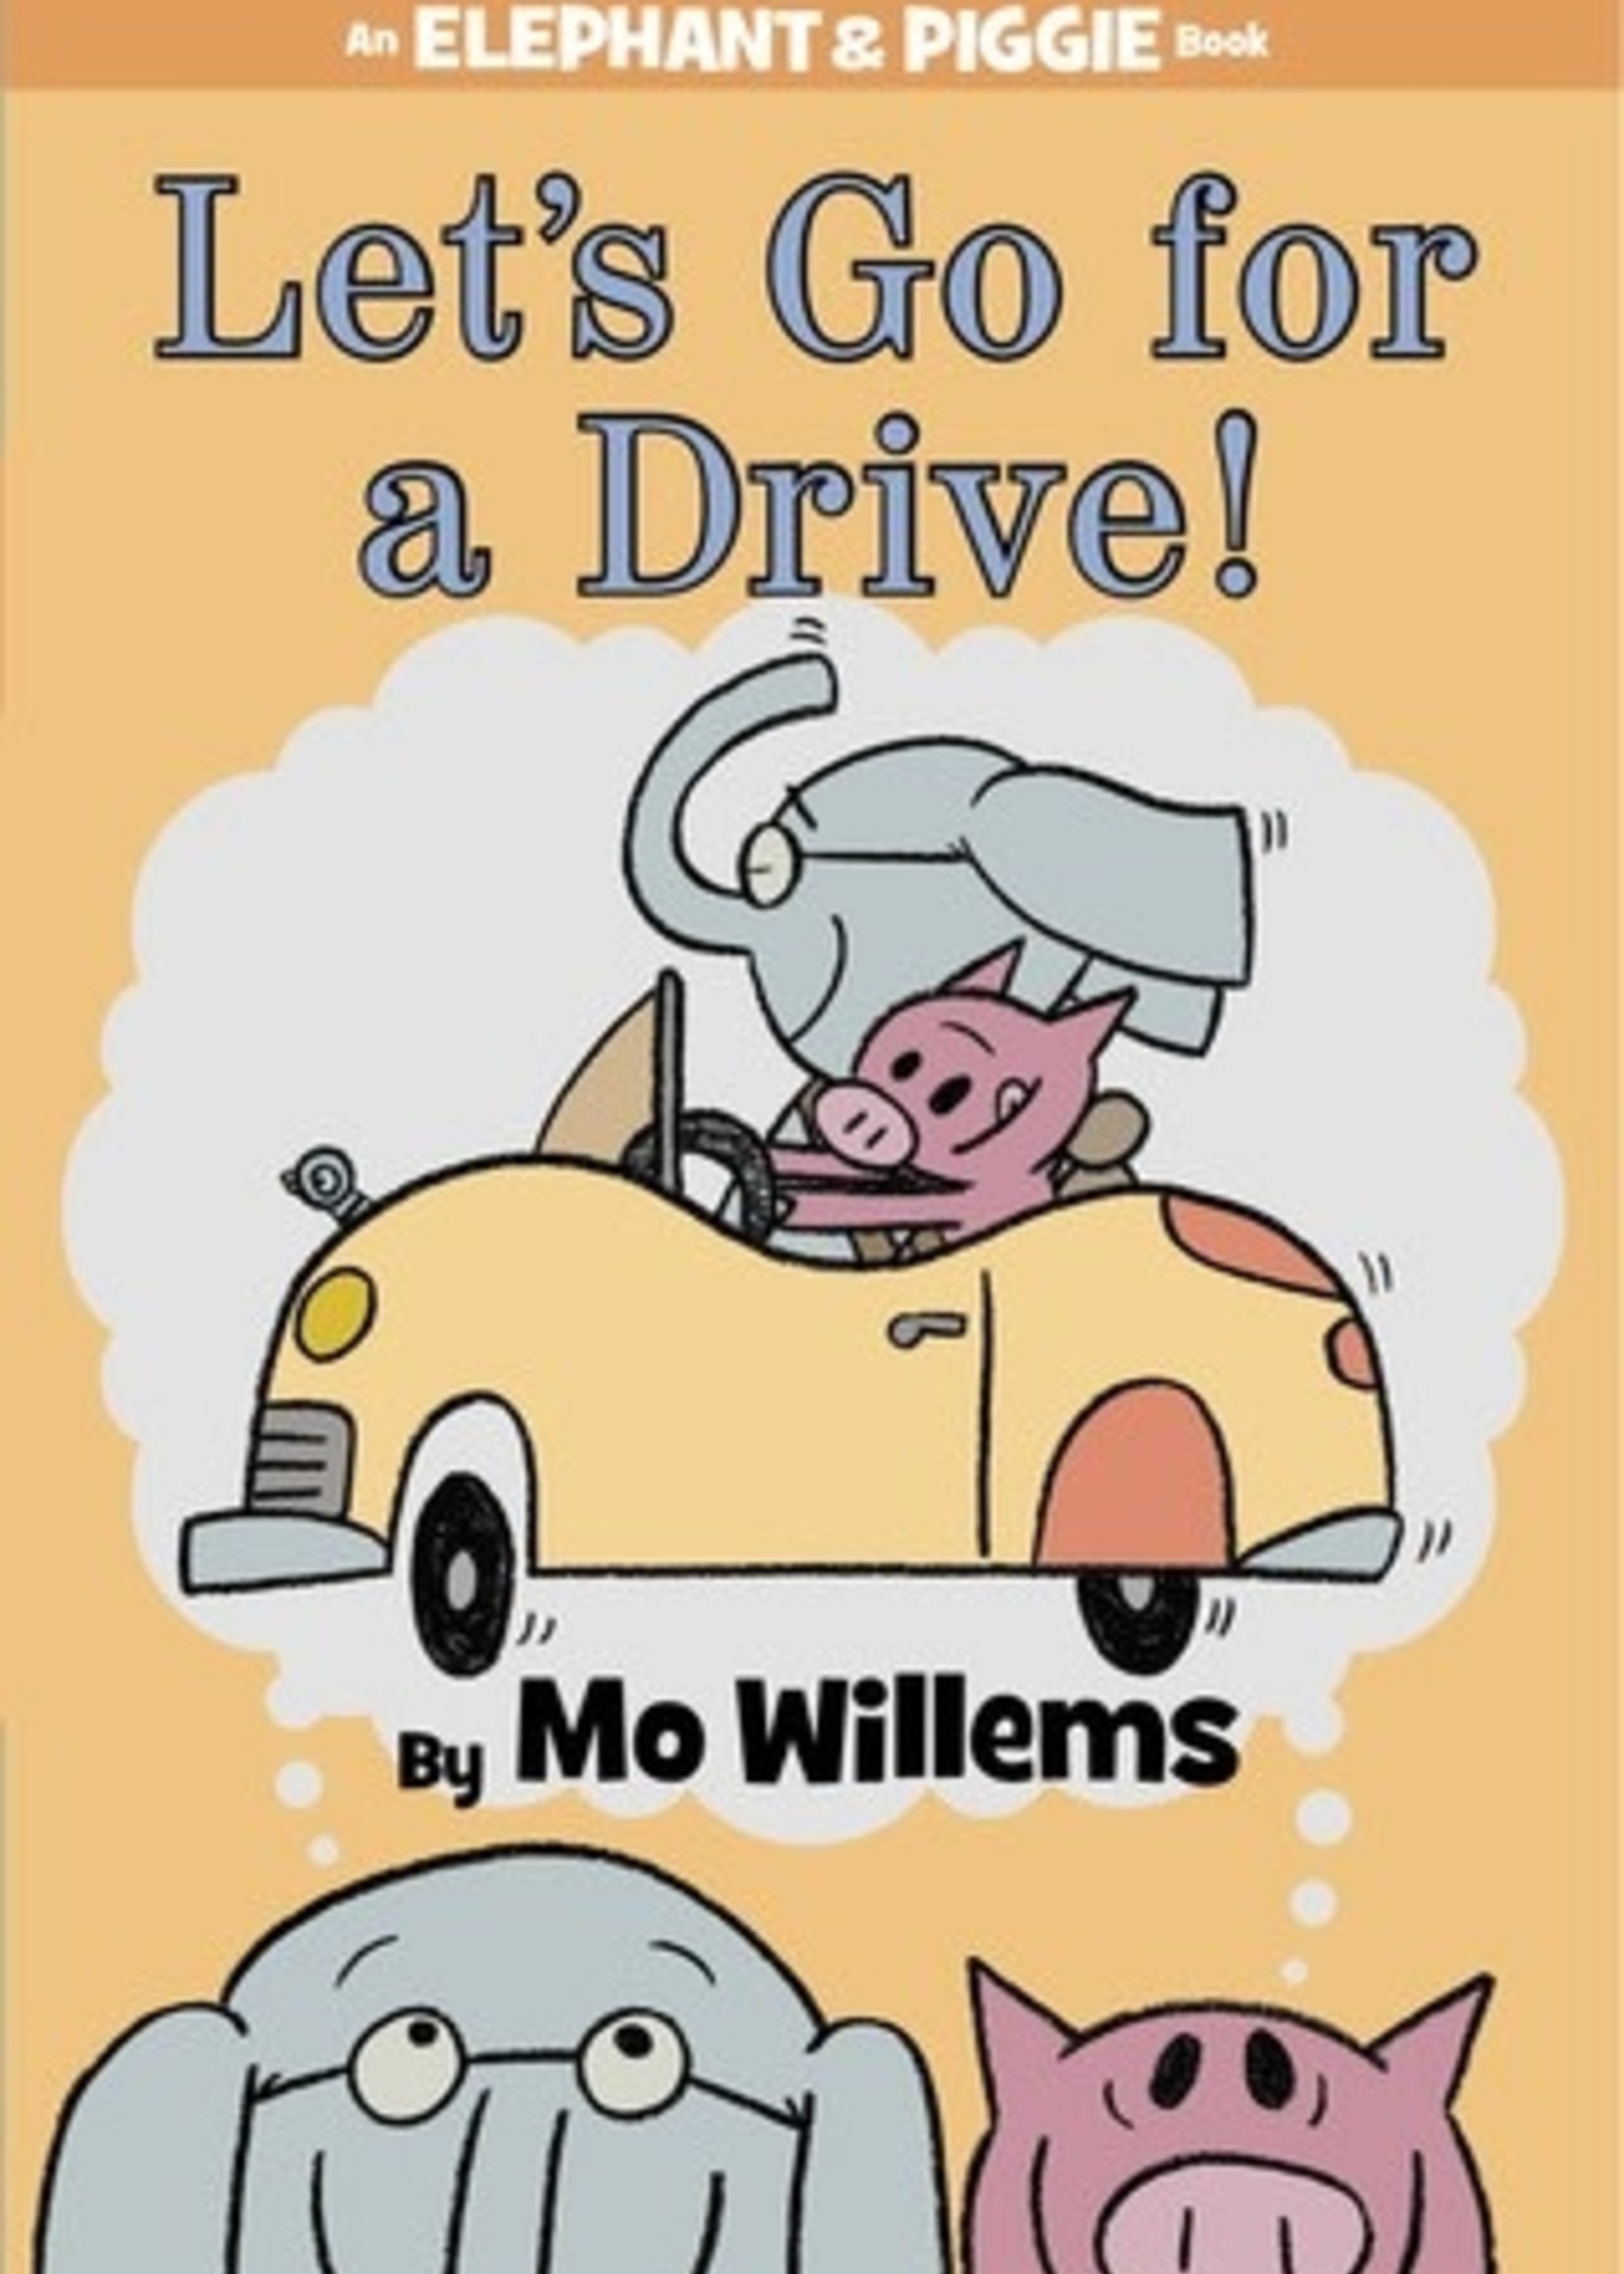 Let's Go For a Drive! by Mo Willems